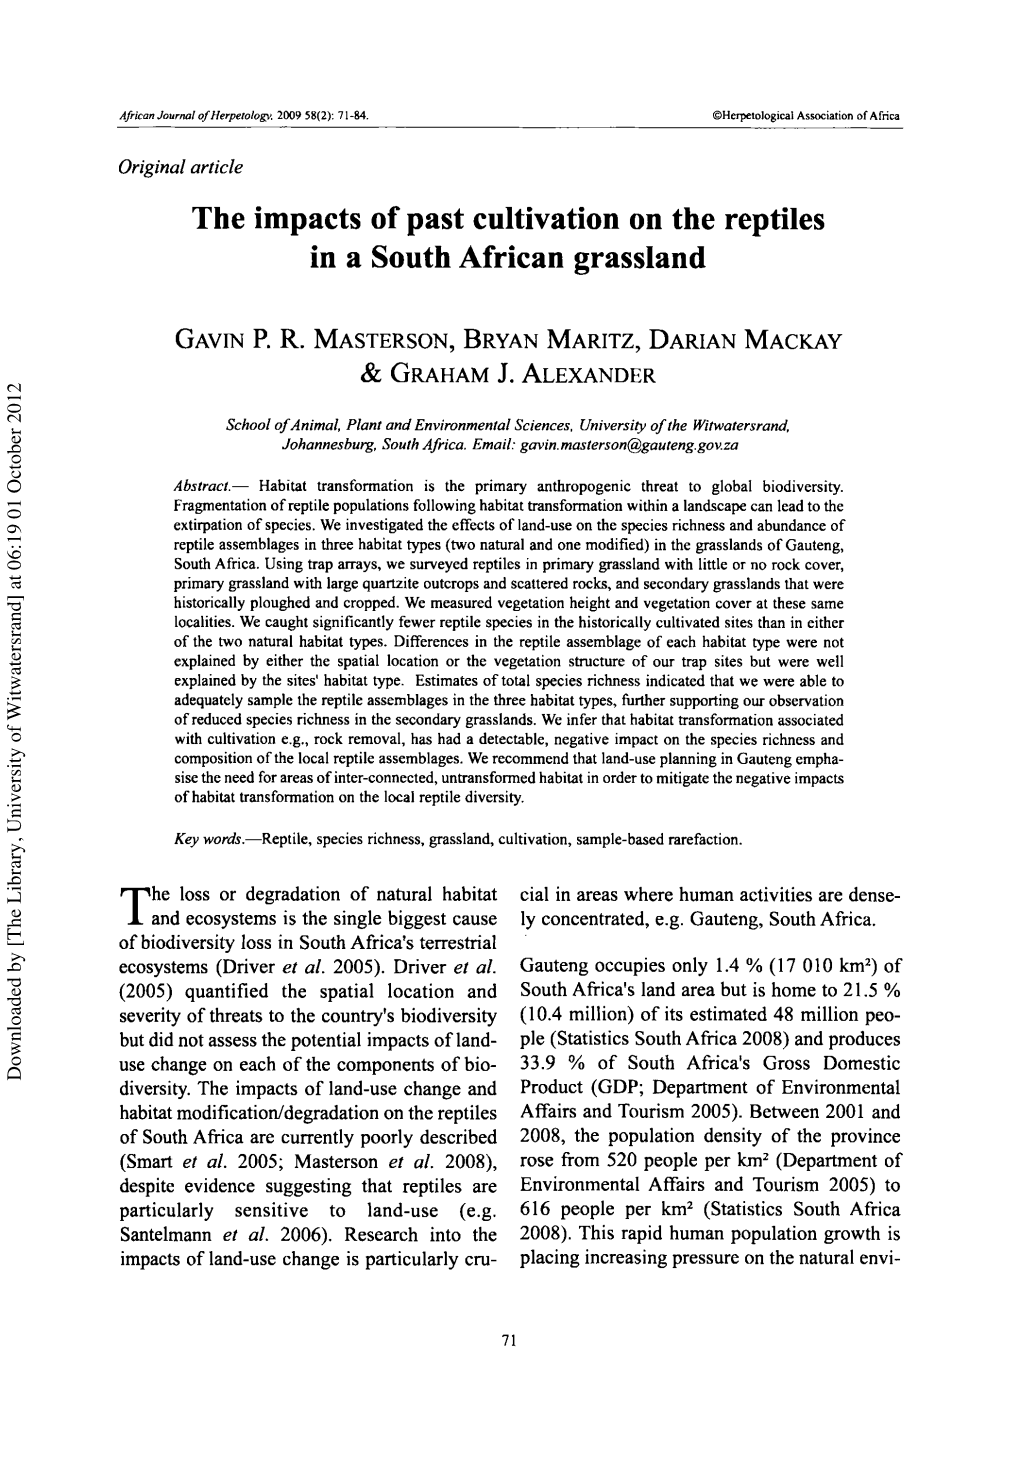 The Impacts of Past Cultivation on the Reptiles in a South African Grassland